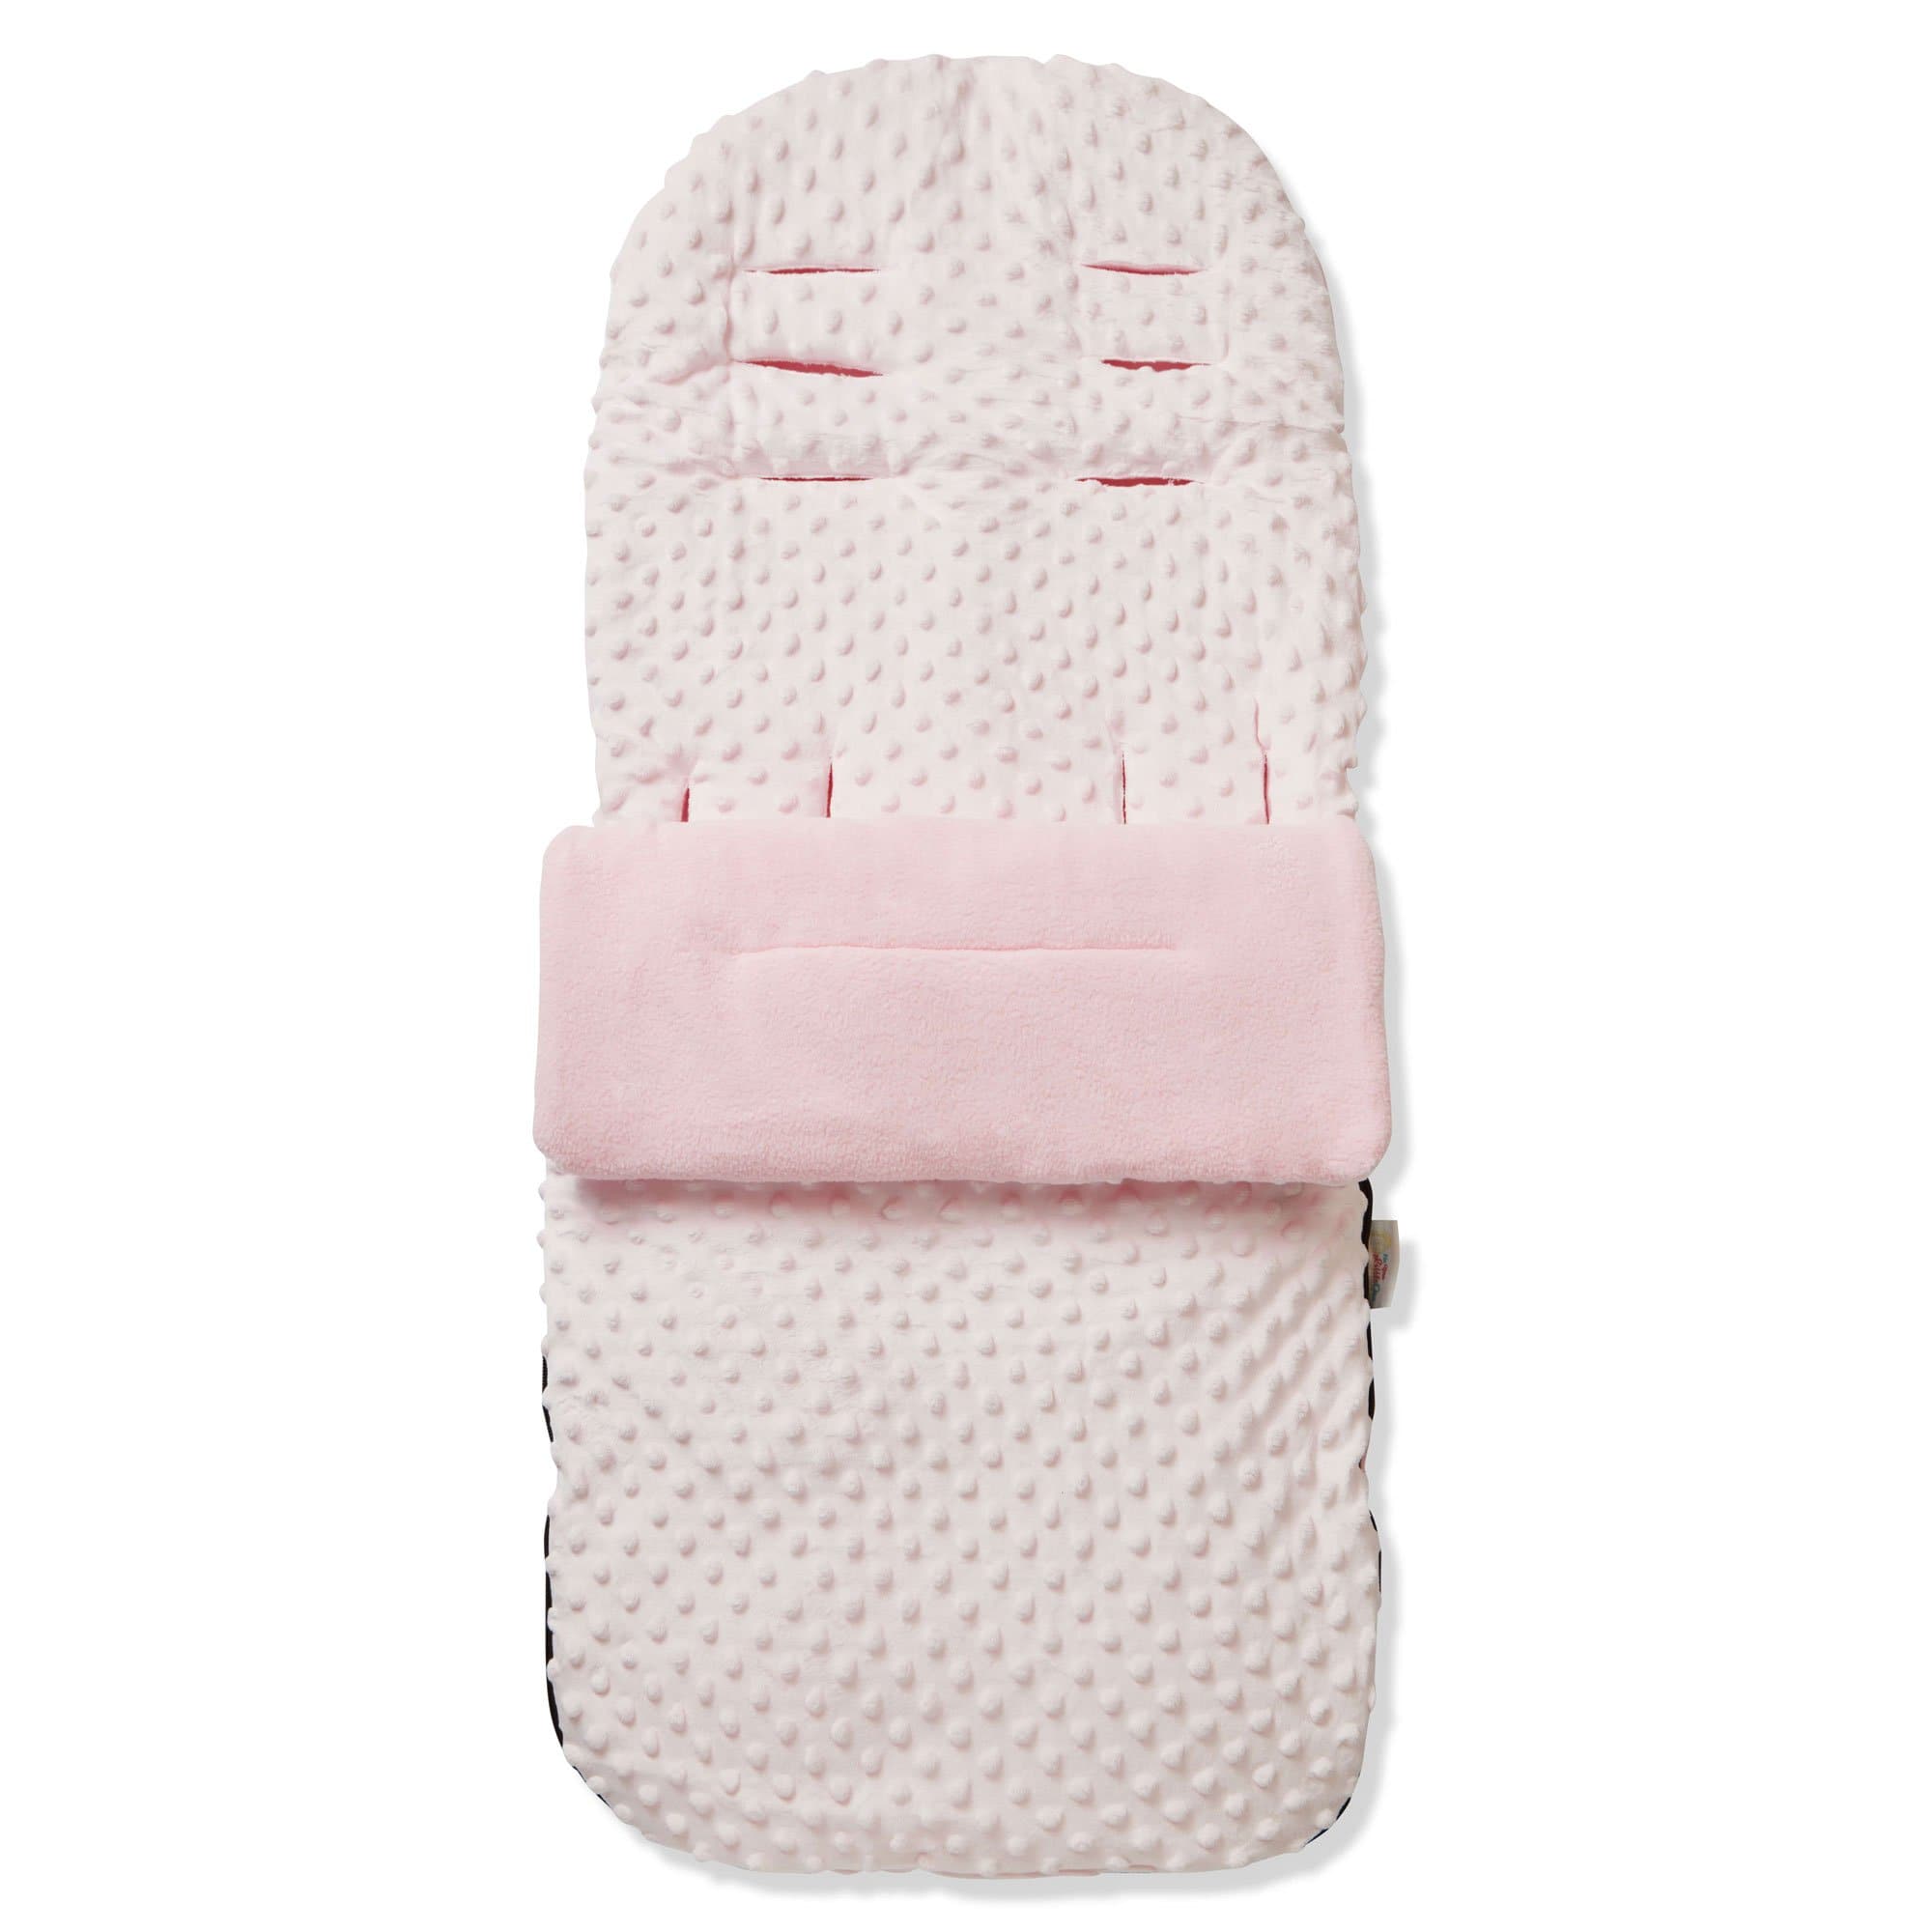 Dimple Footmuff / Cosy Toes Compatible with Recaro - Pink / Fits All Models | For Your Little One